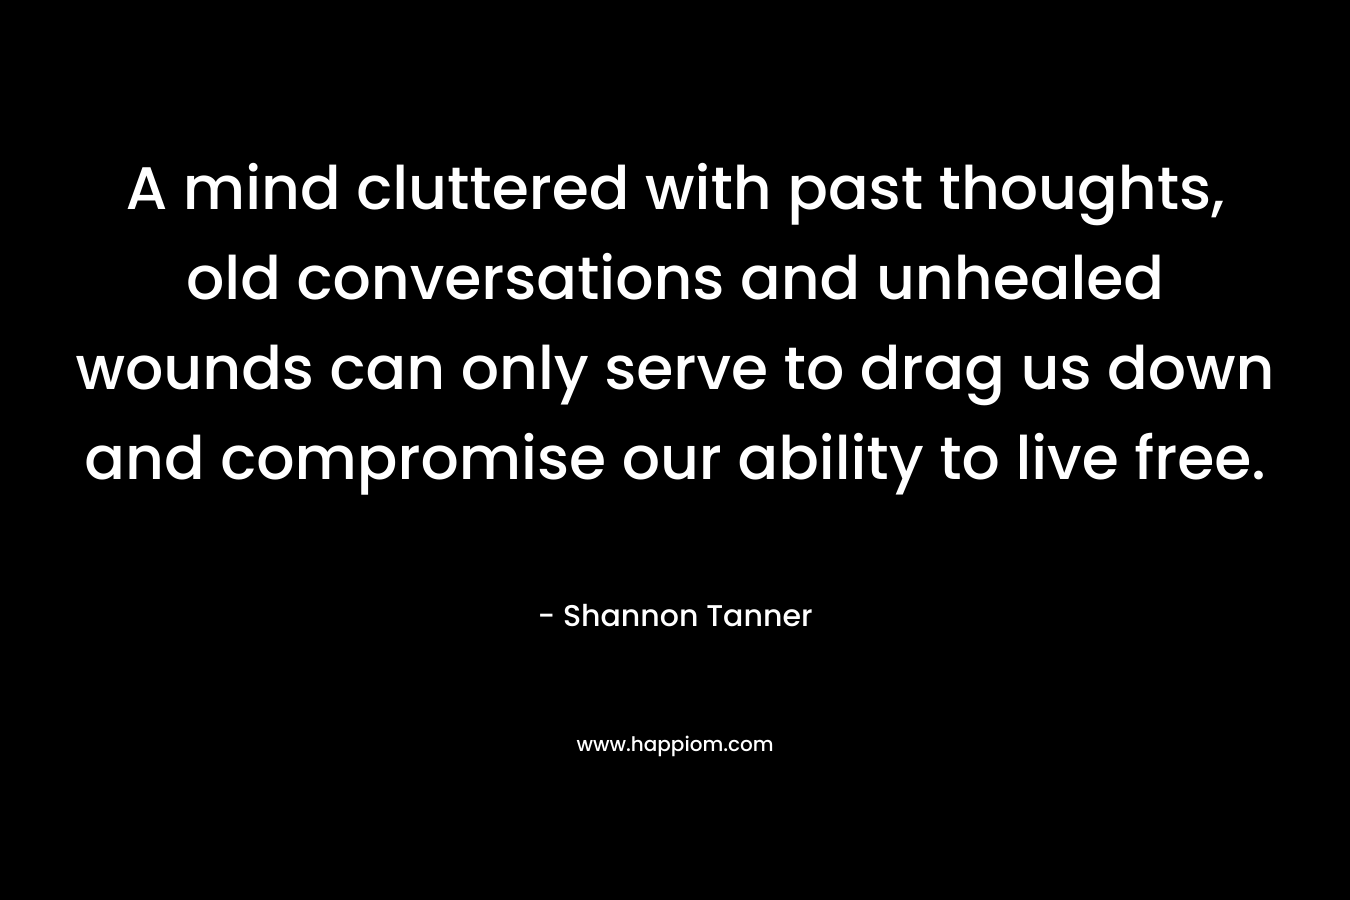 A mind cluttered with past thoughts, old conversations and unhealed wounds can only serve to drag us down and compromise our ability to live free. – Shannon Tanner